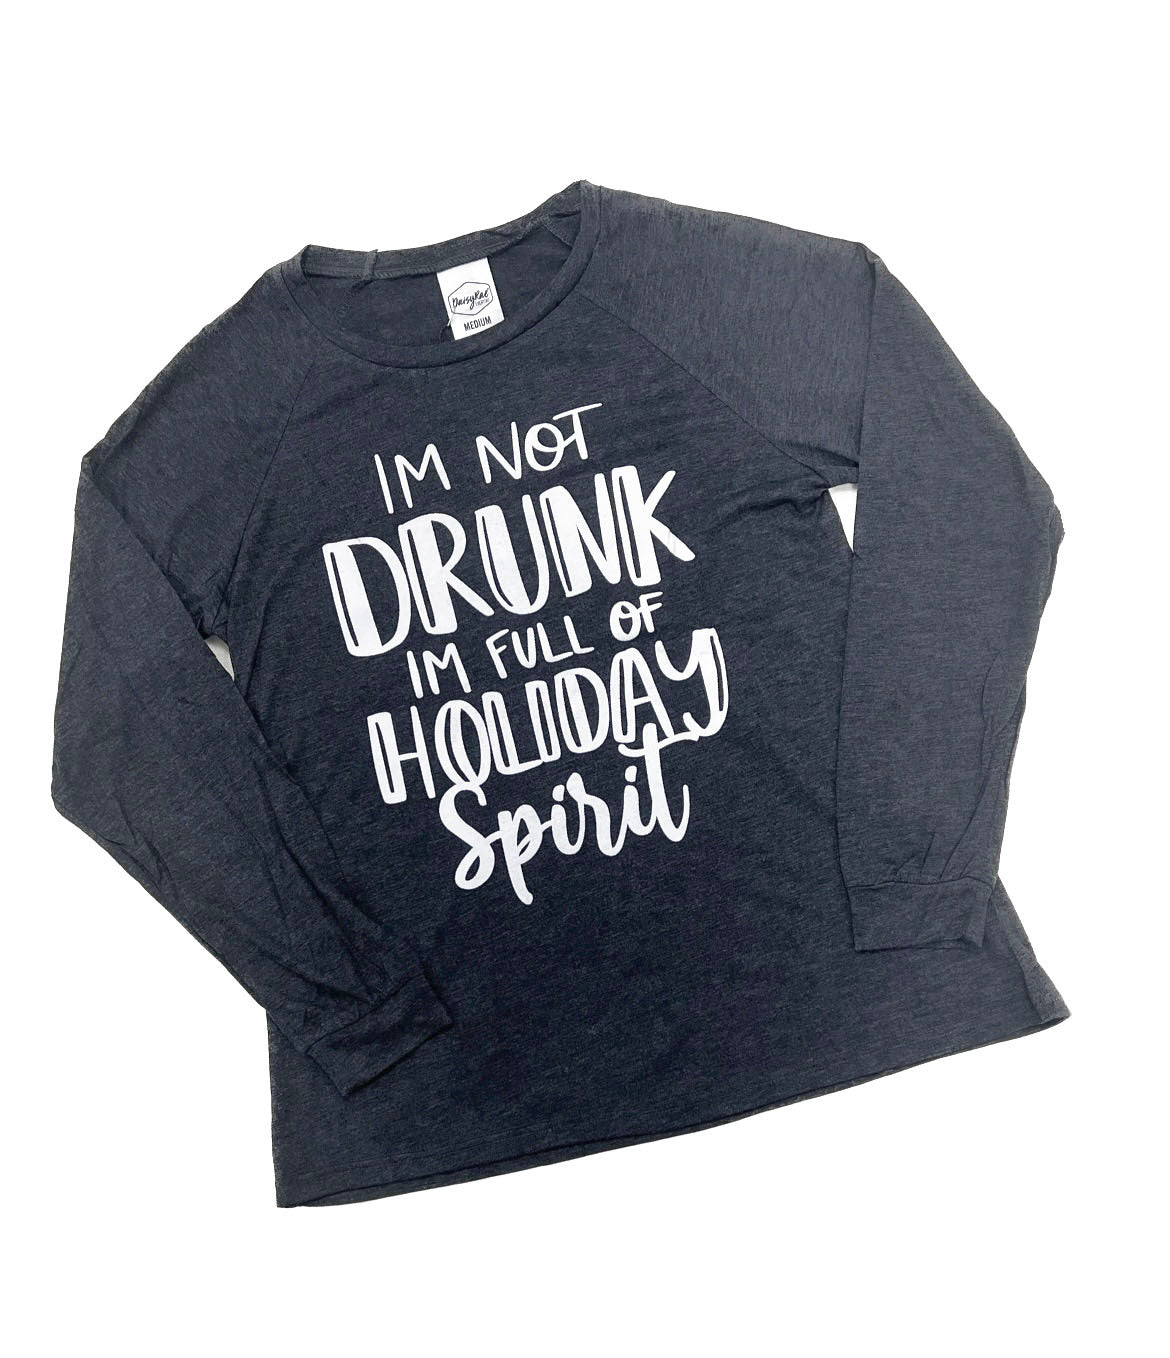 I'm Not Drunk I'm Full of Holiday Spirit on Charcoal Grey Long-Sleeved Tee